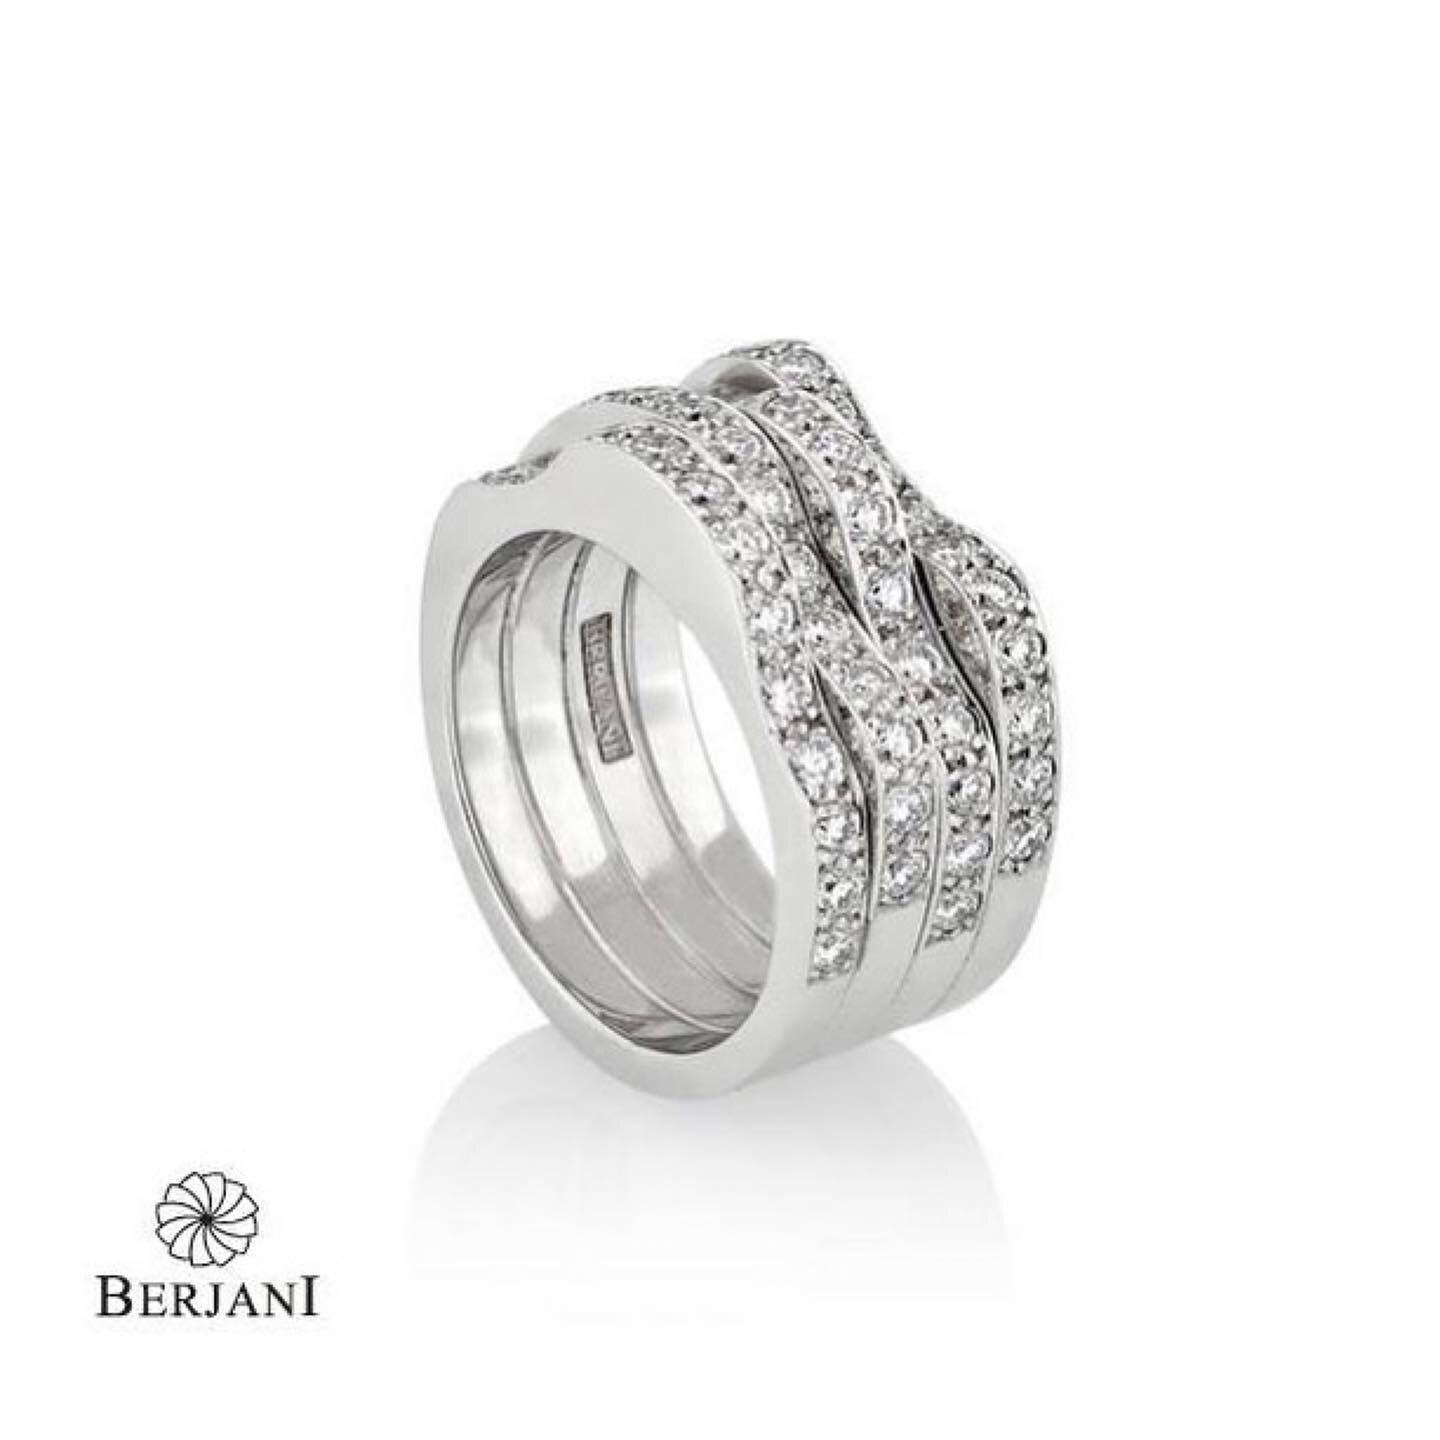 BERJANI Signature - A more 'modest' version of our award winning 'WAVES' ring. Handcrafted in white gold and set with 1.48cts of perfect brilliant cut diamonds. Now available...

#berjanijewels #berjanijewellers #berjanifinejewellery #awardwinner #aw